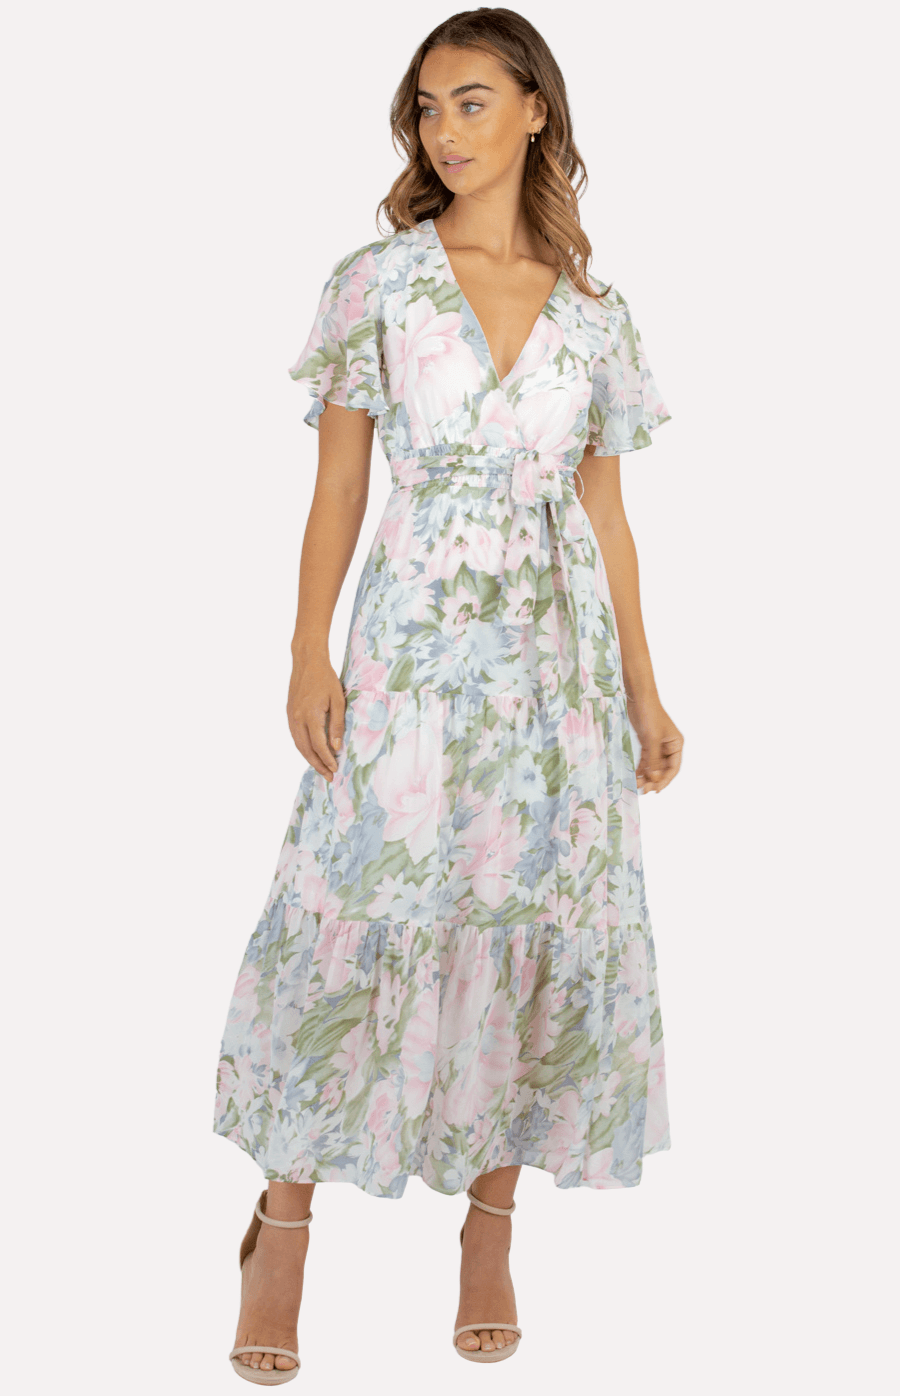 Marcelina Maxi Dress in Pink & Lilac Floral - Ophelia Fox Boutique